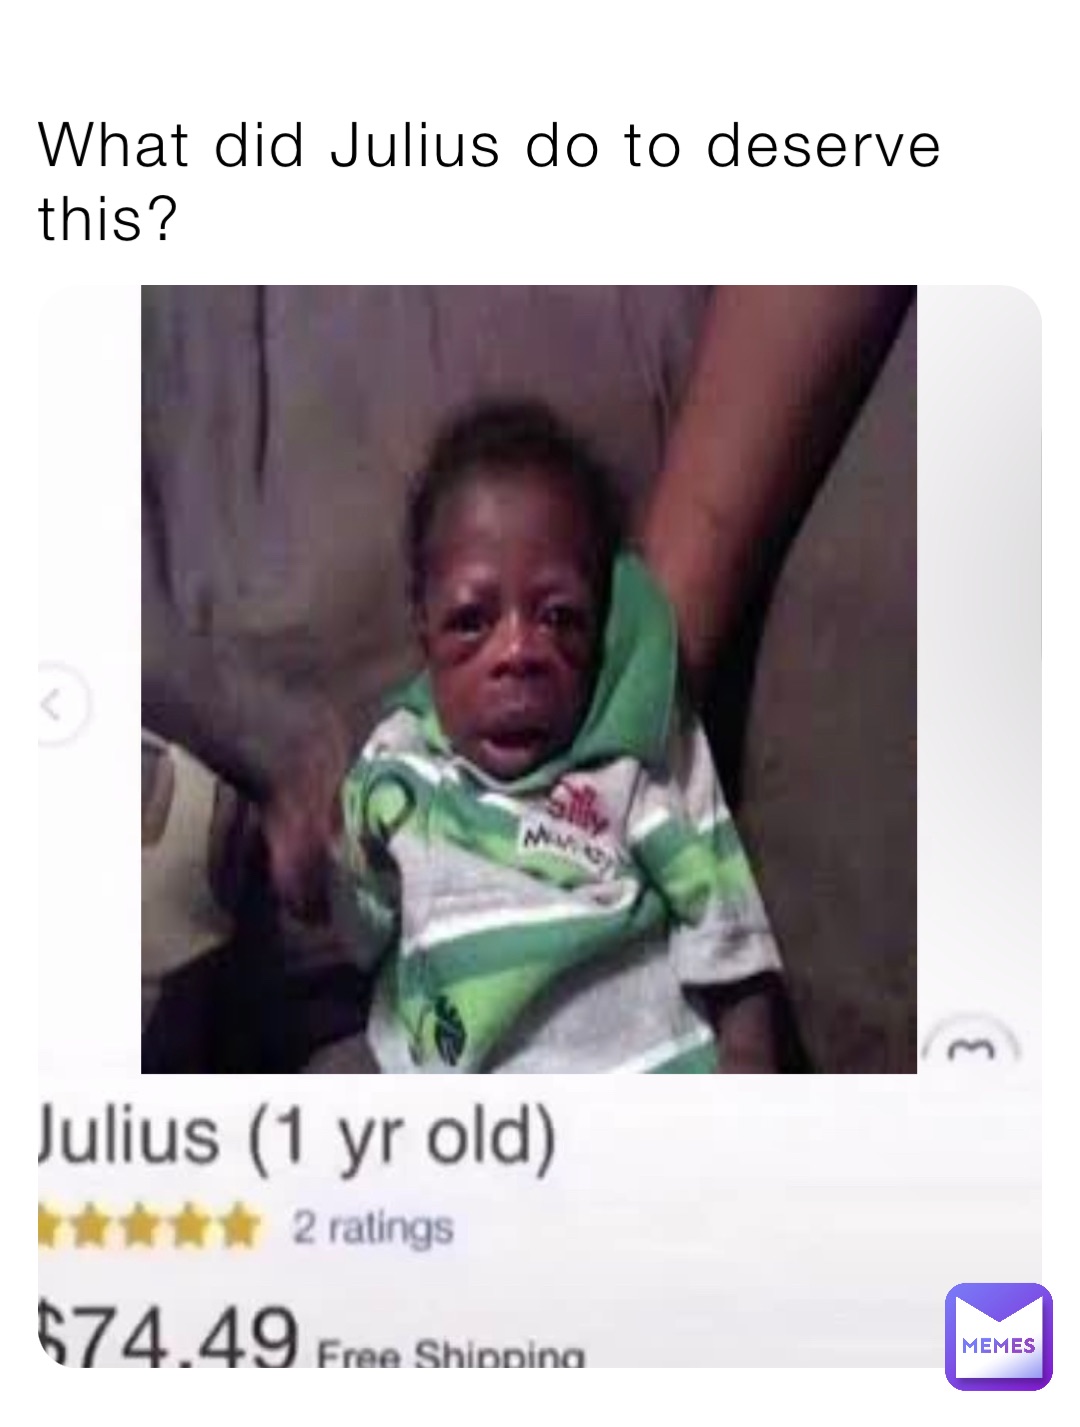 What did Julius do to deserve this?